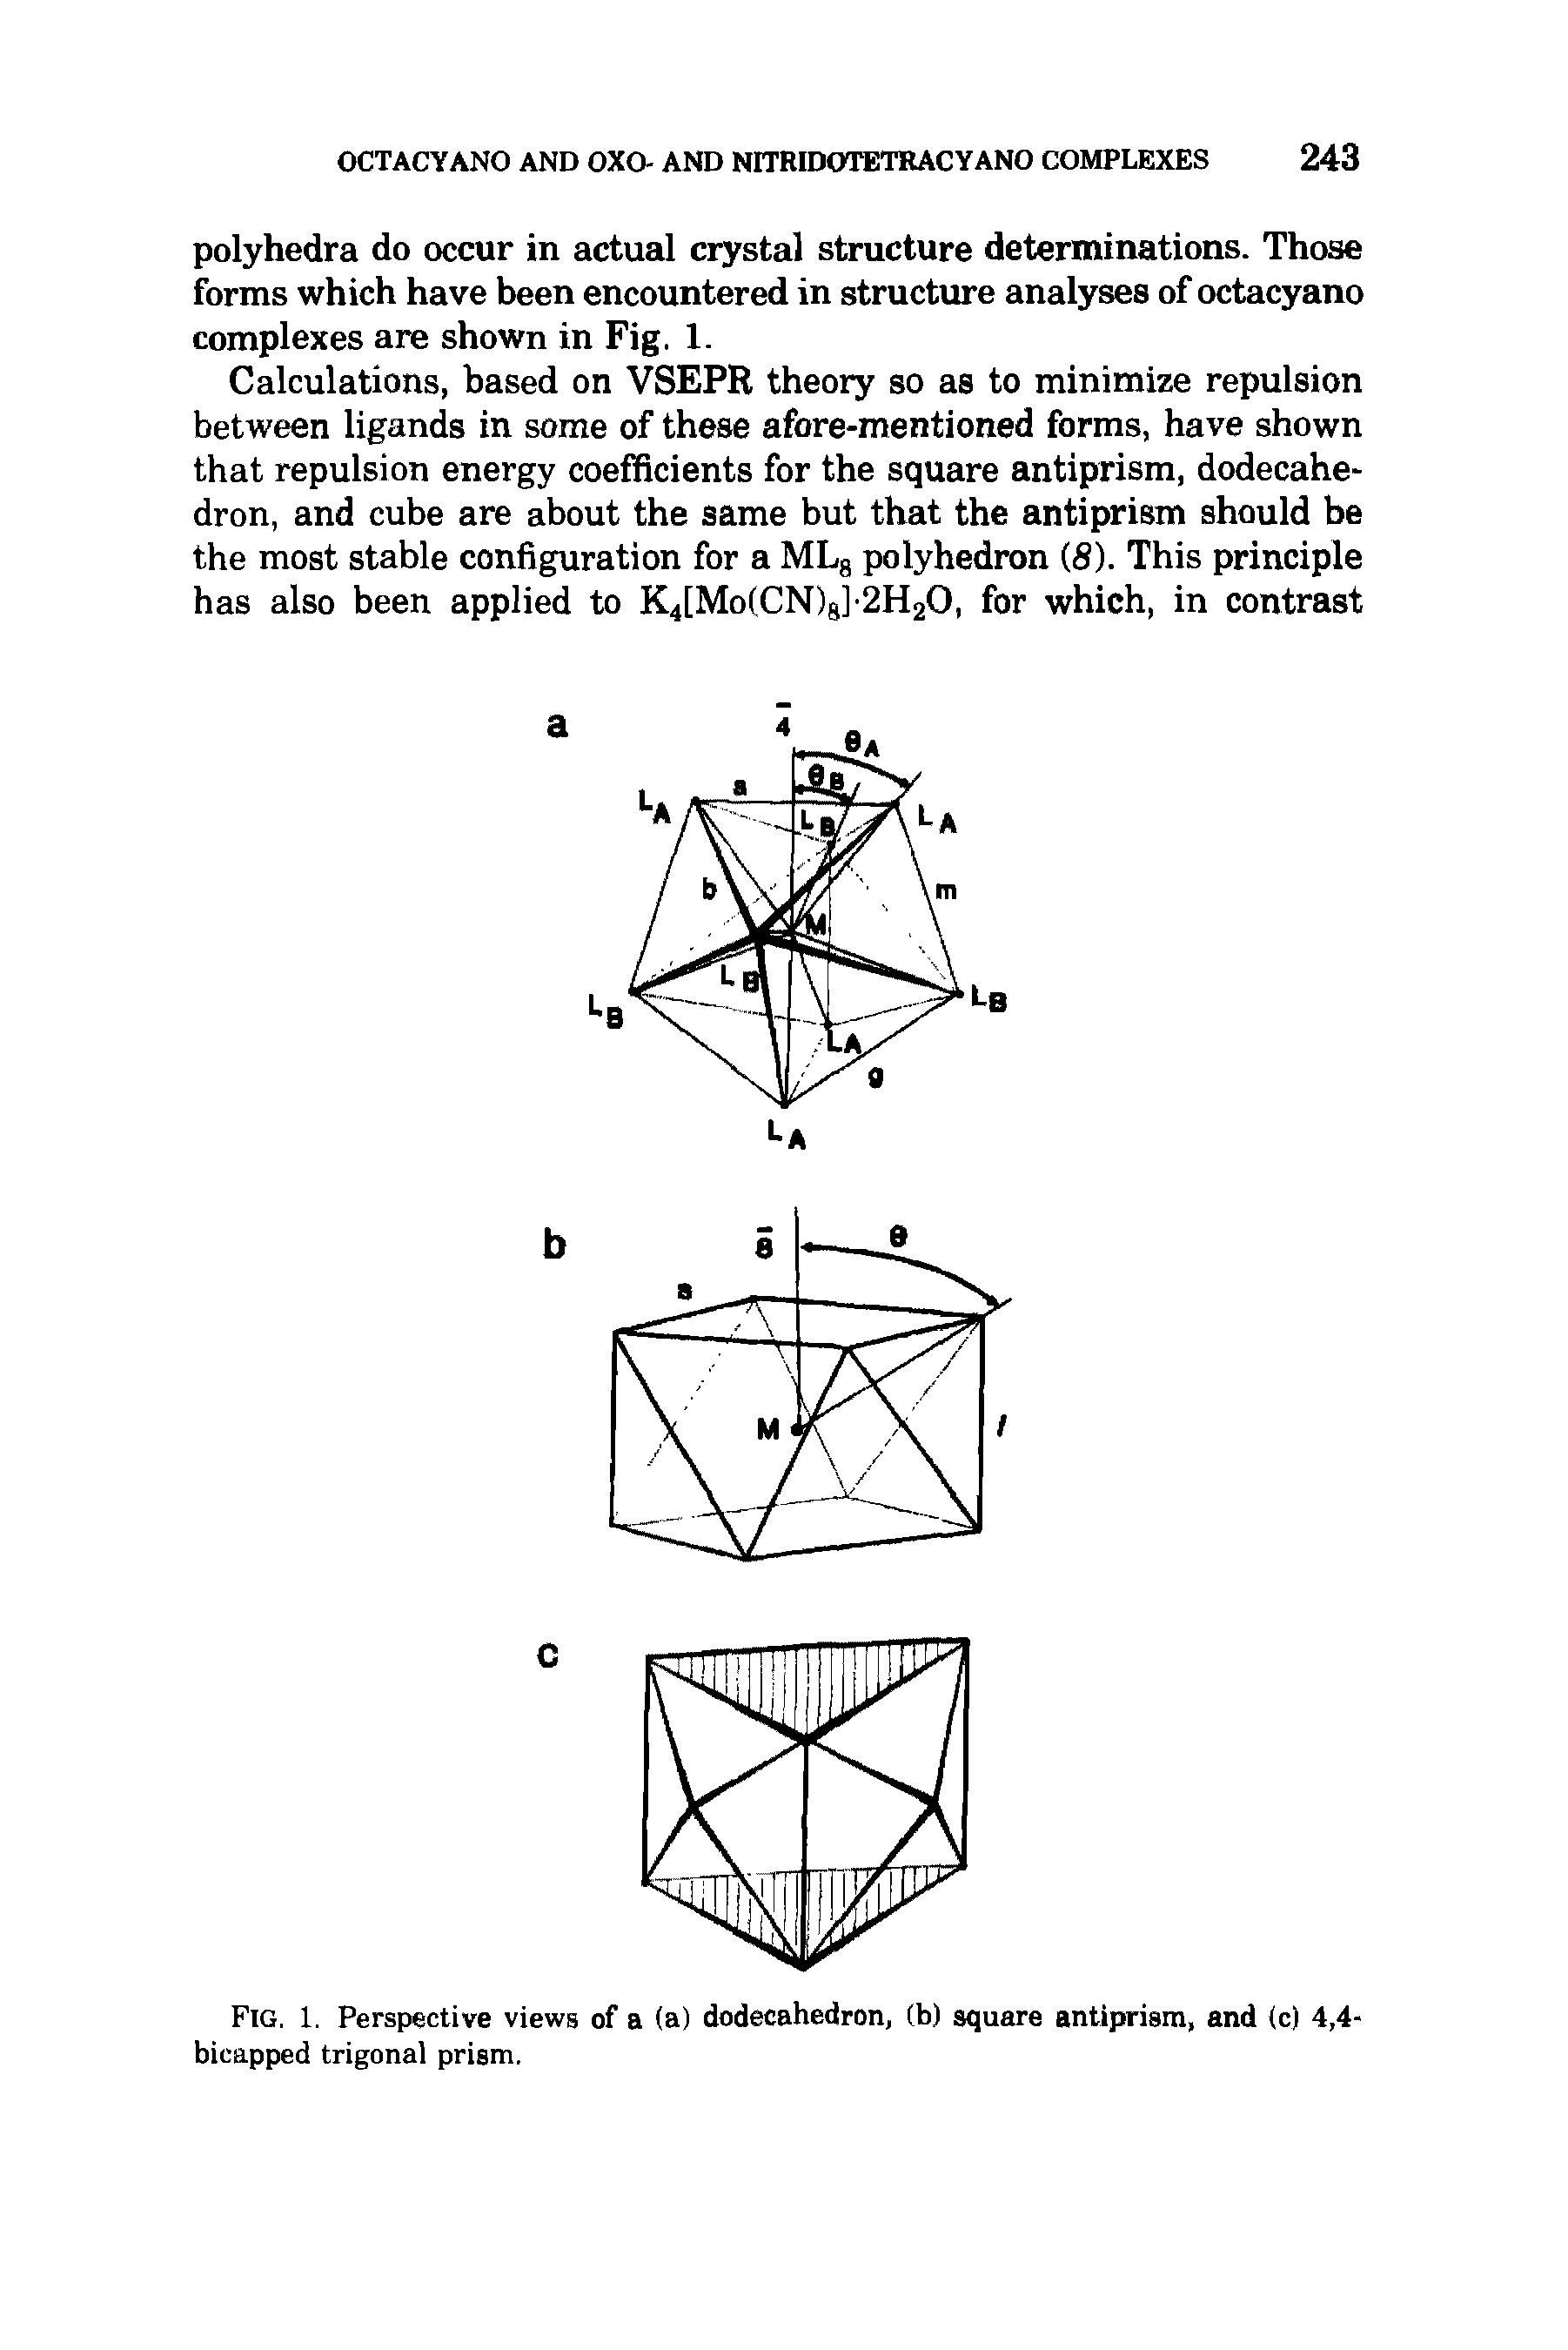 Fig. 1. Perspective views of a (a) dodecahedron, (b) square antiprism, and (c) 4,4-bicapped trigonal prism.